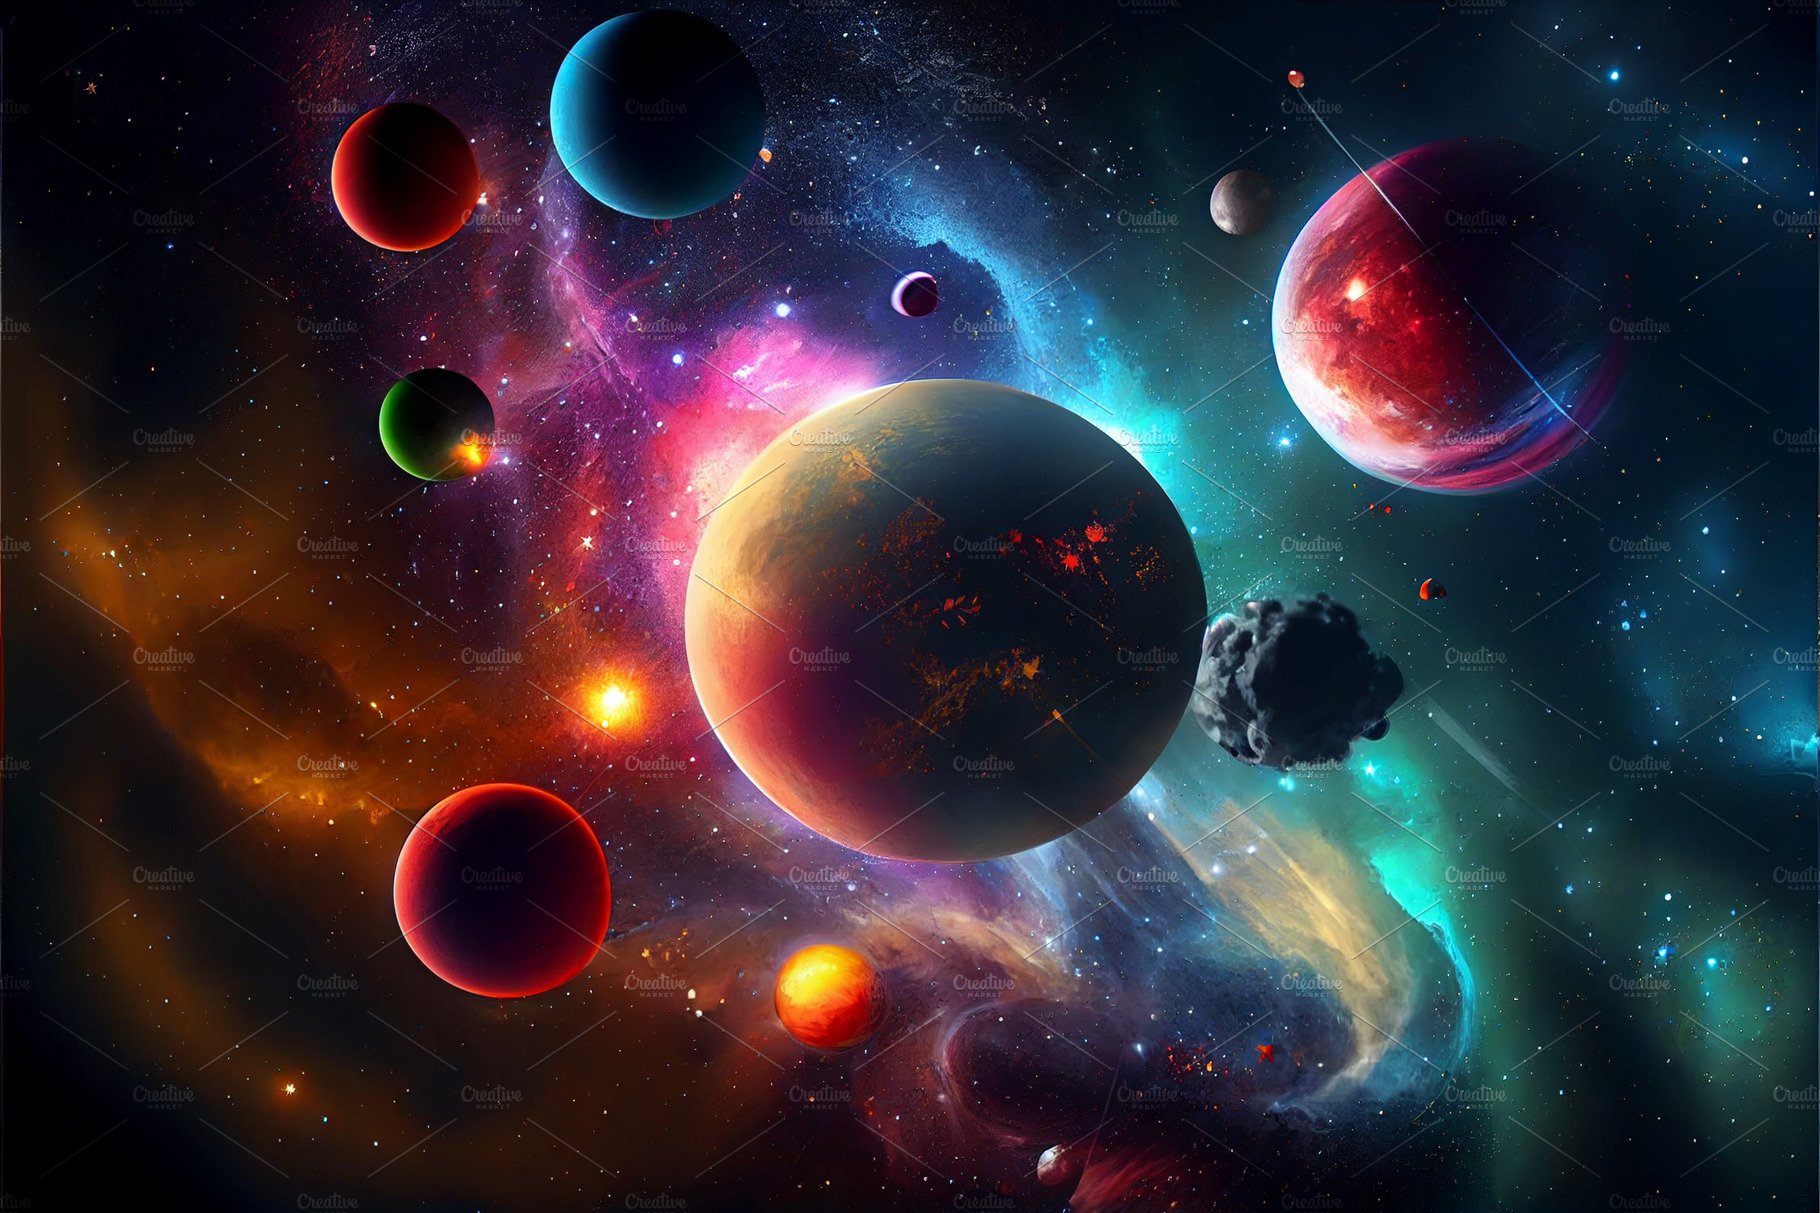 Abstract space background with planets in galaxy and stars cover image.